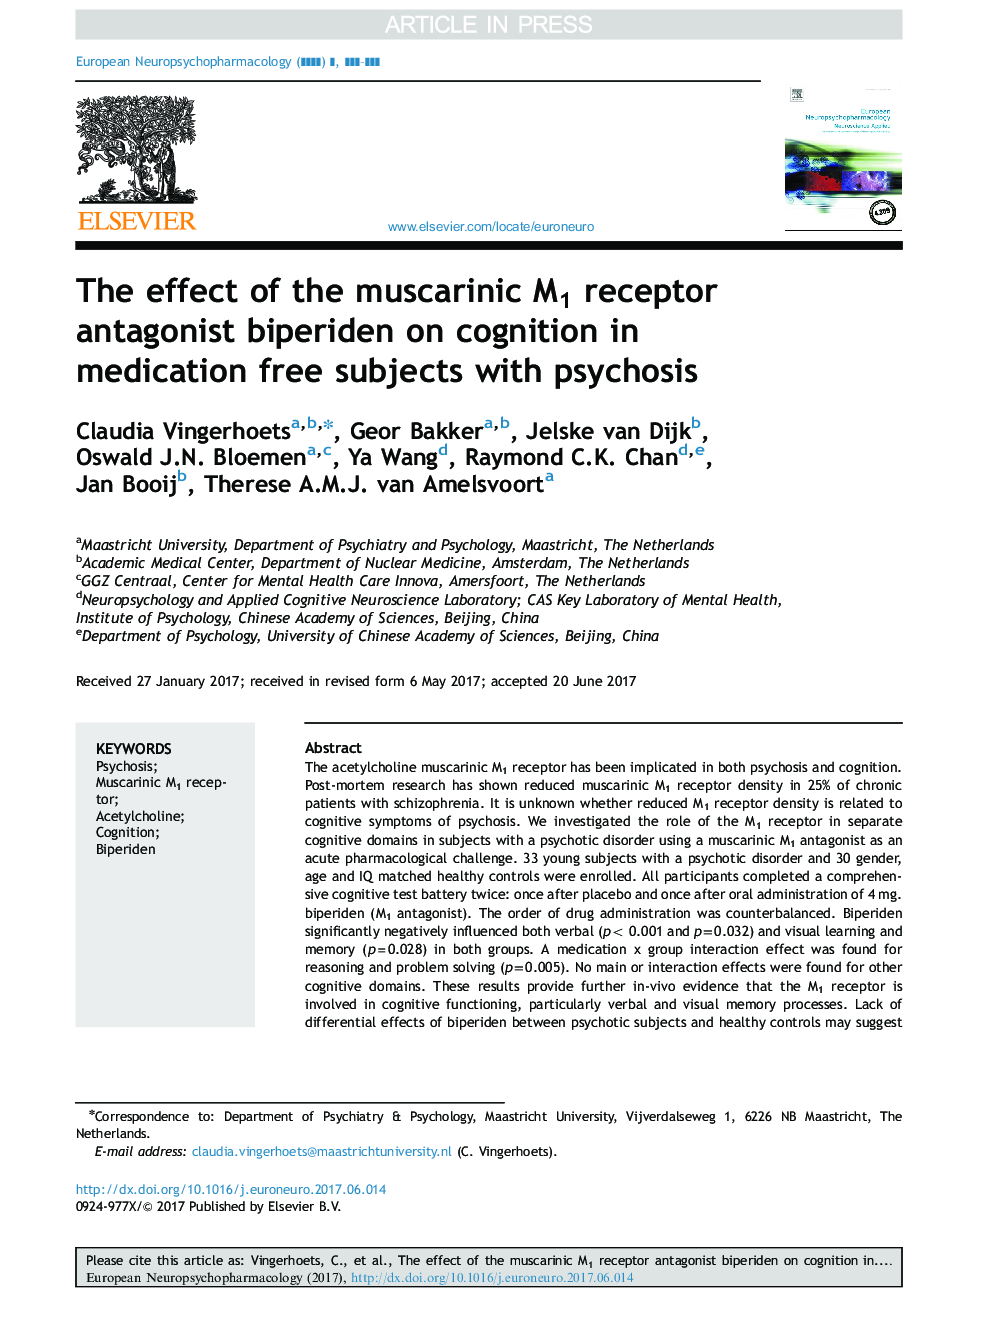 The effect of the muscarinic M1 receptor antagonist biperiden on cognition in medication free subjects with psychosis